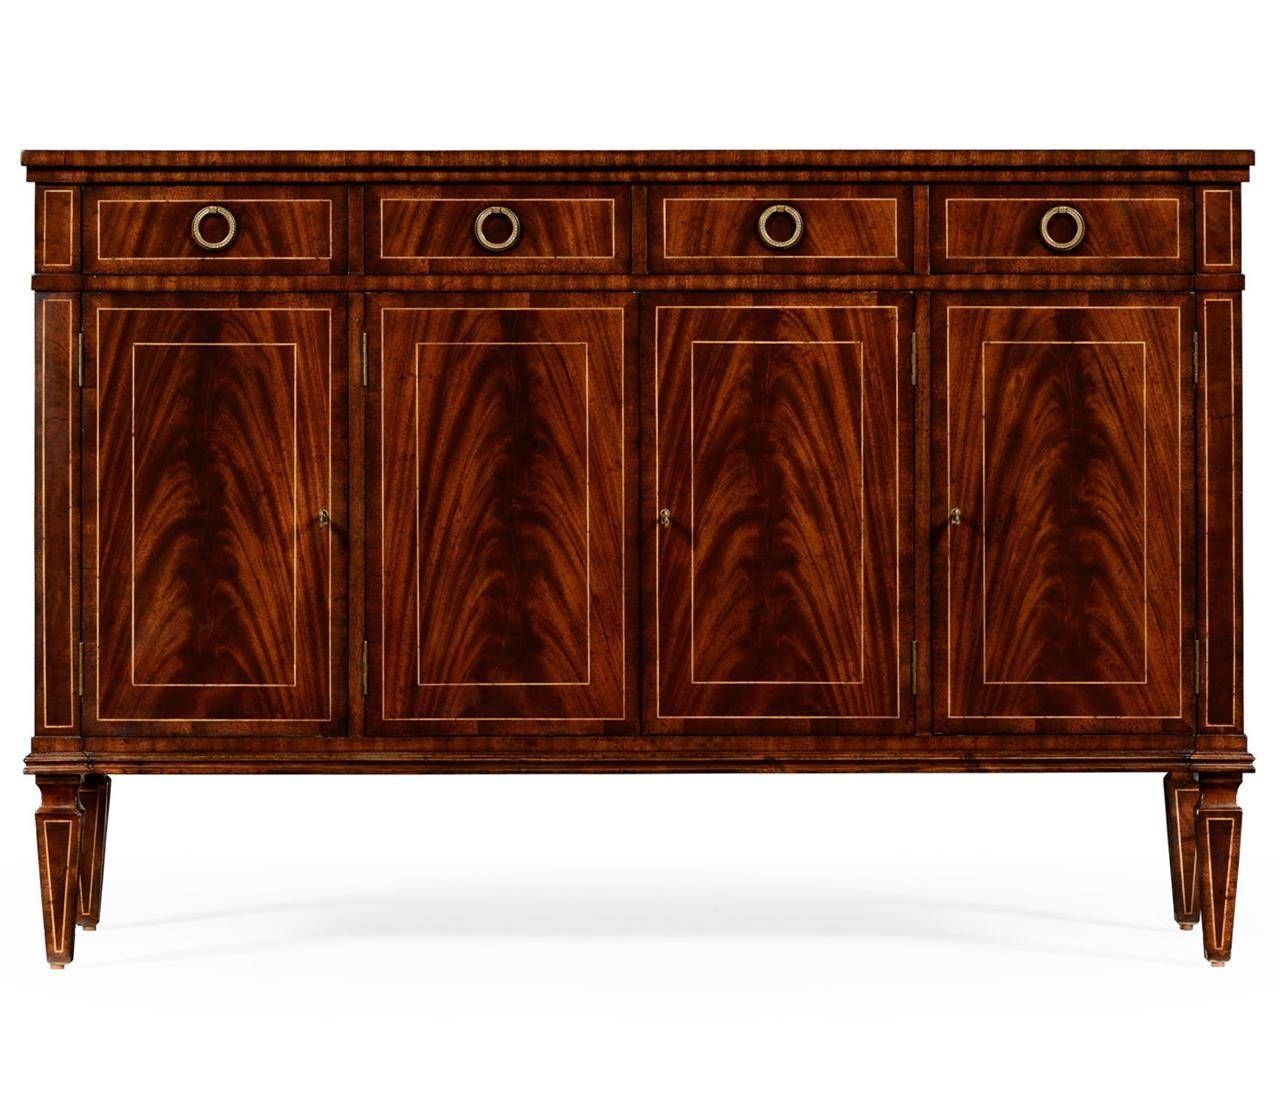 Luxurious Mahogany Sideboard With Inlay Within Mahogany Sideboards (View 10 of 15)